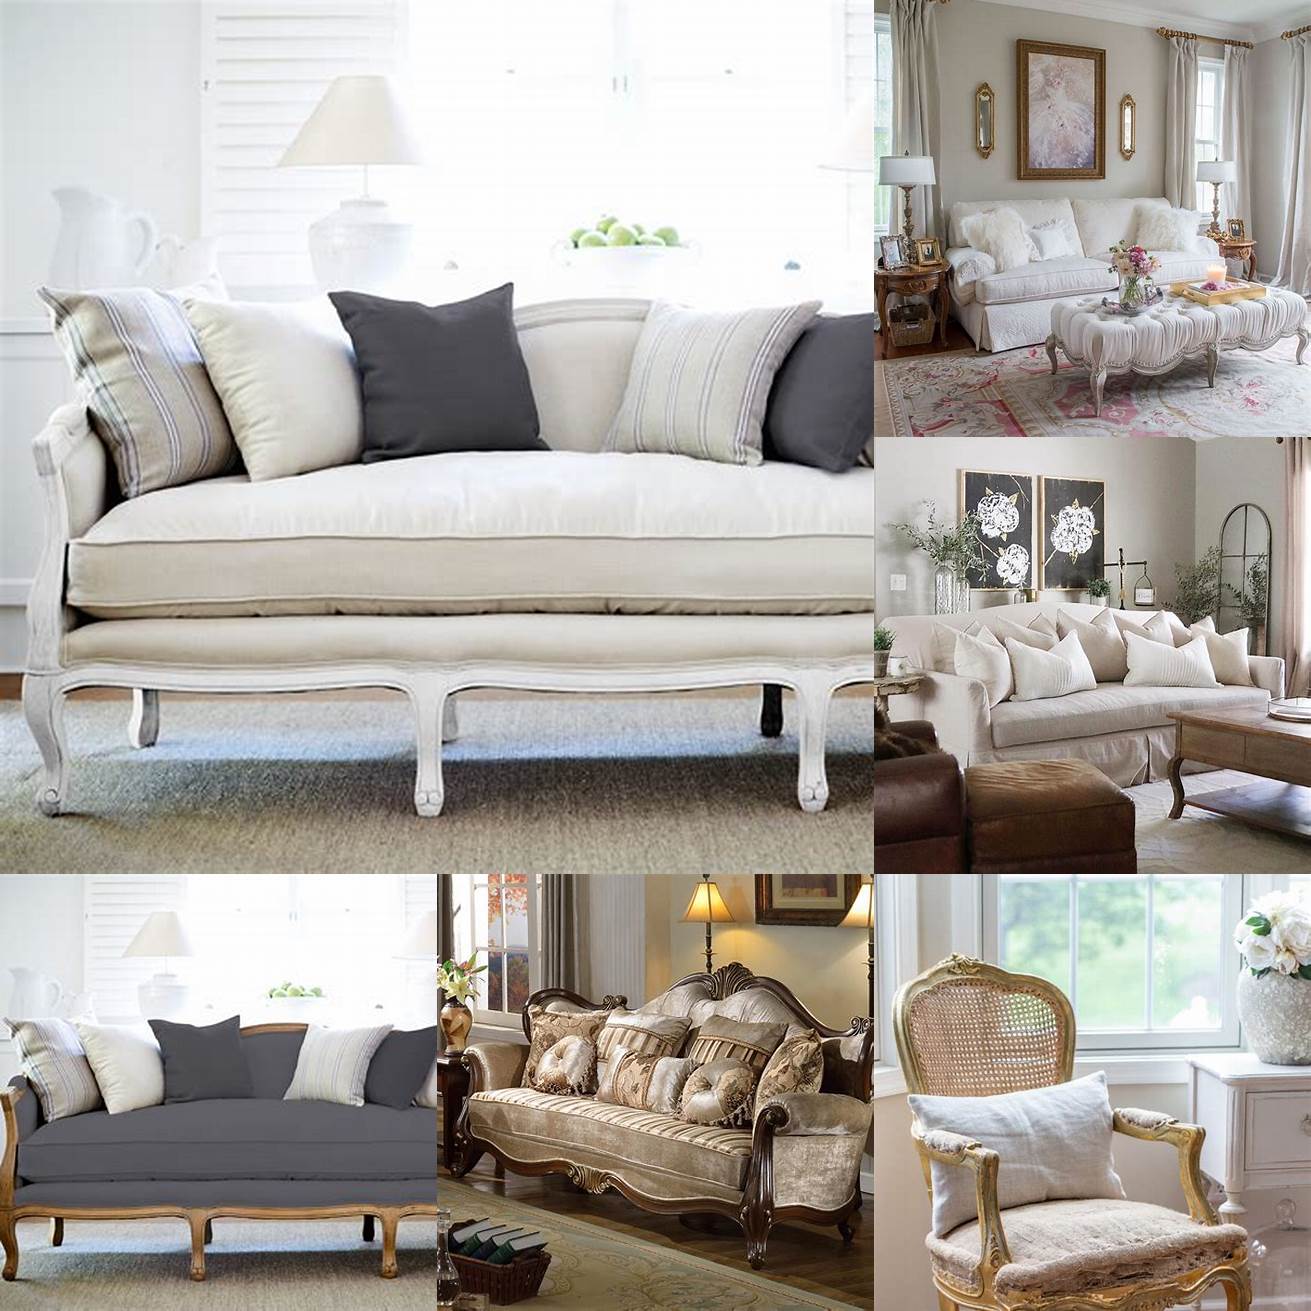 Pair a French Provincial sofa with modern accent chairs for a chic and eclectic look